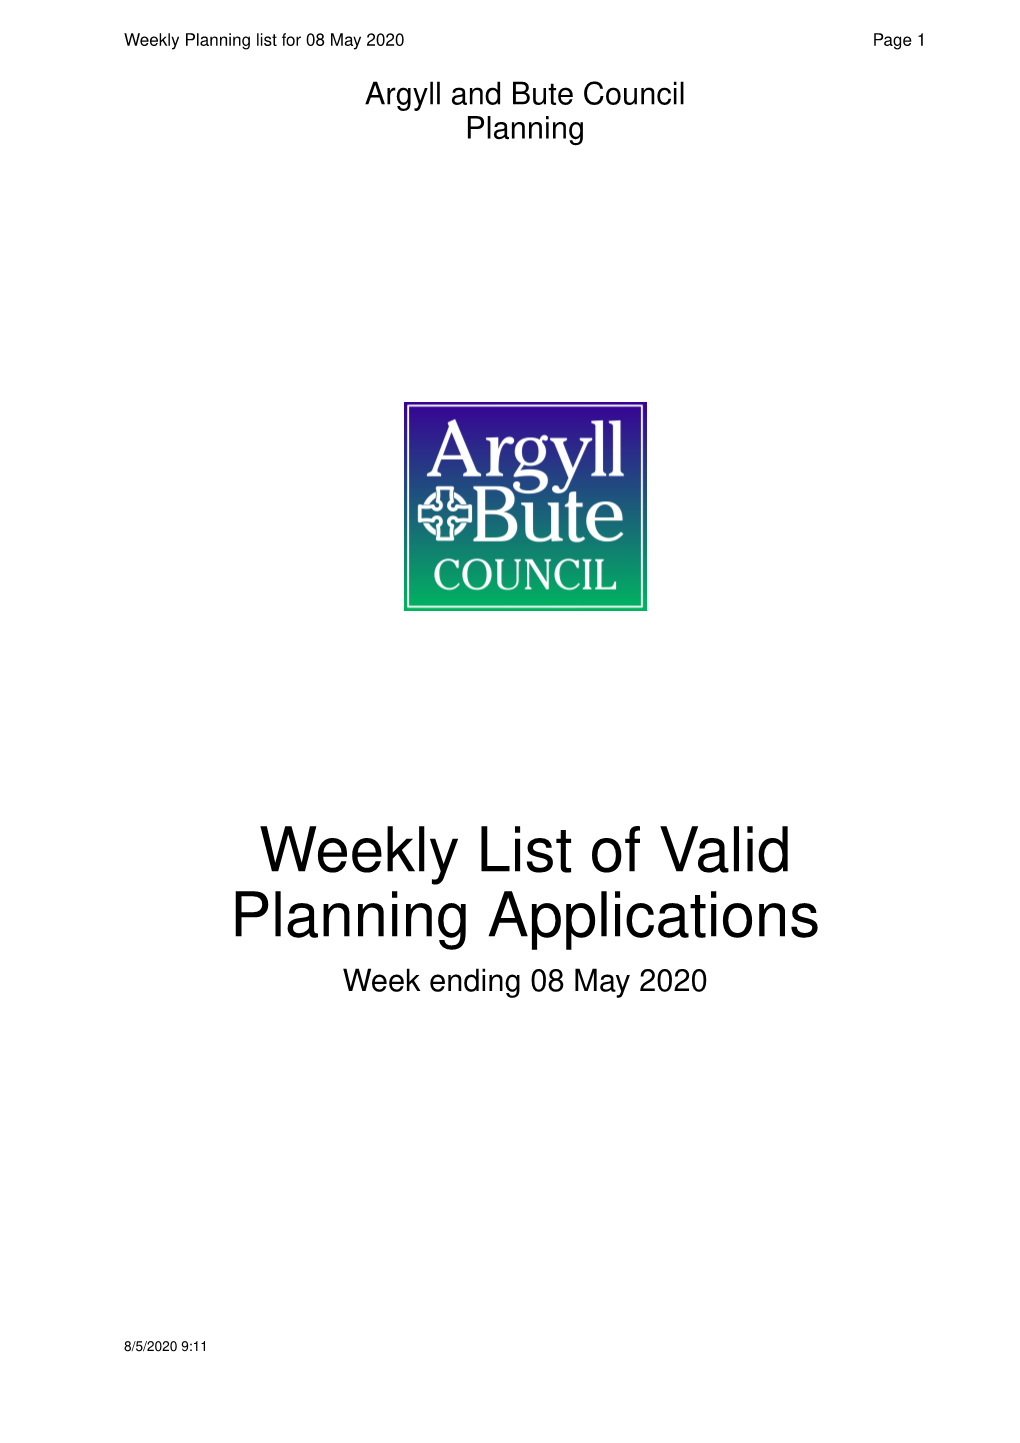 Weekly List of Valid Planning Applications 8Th May 2020.Pdf